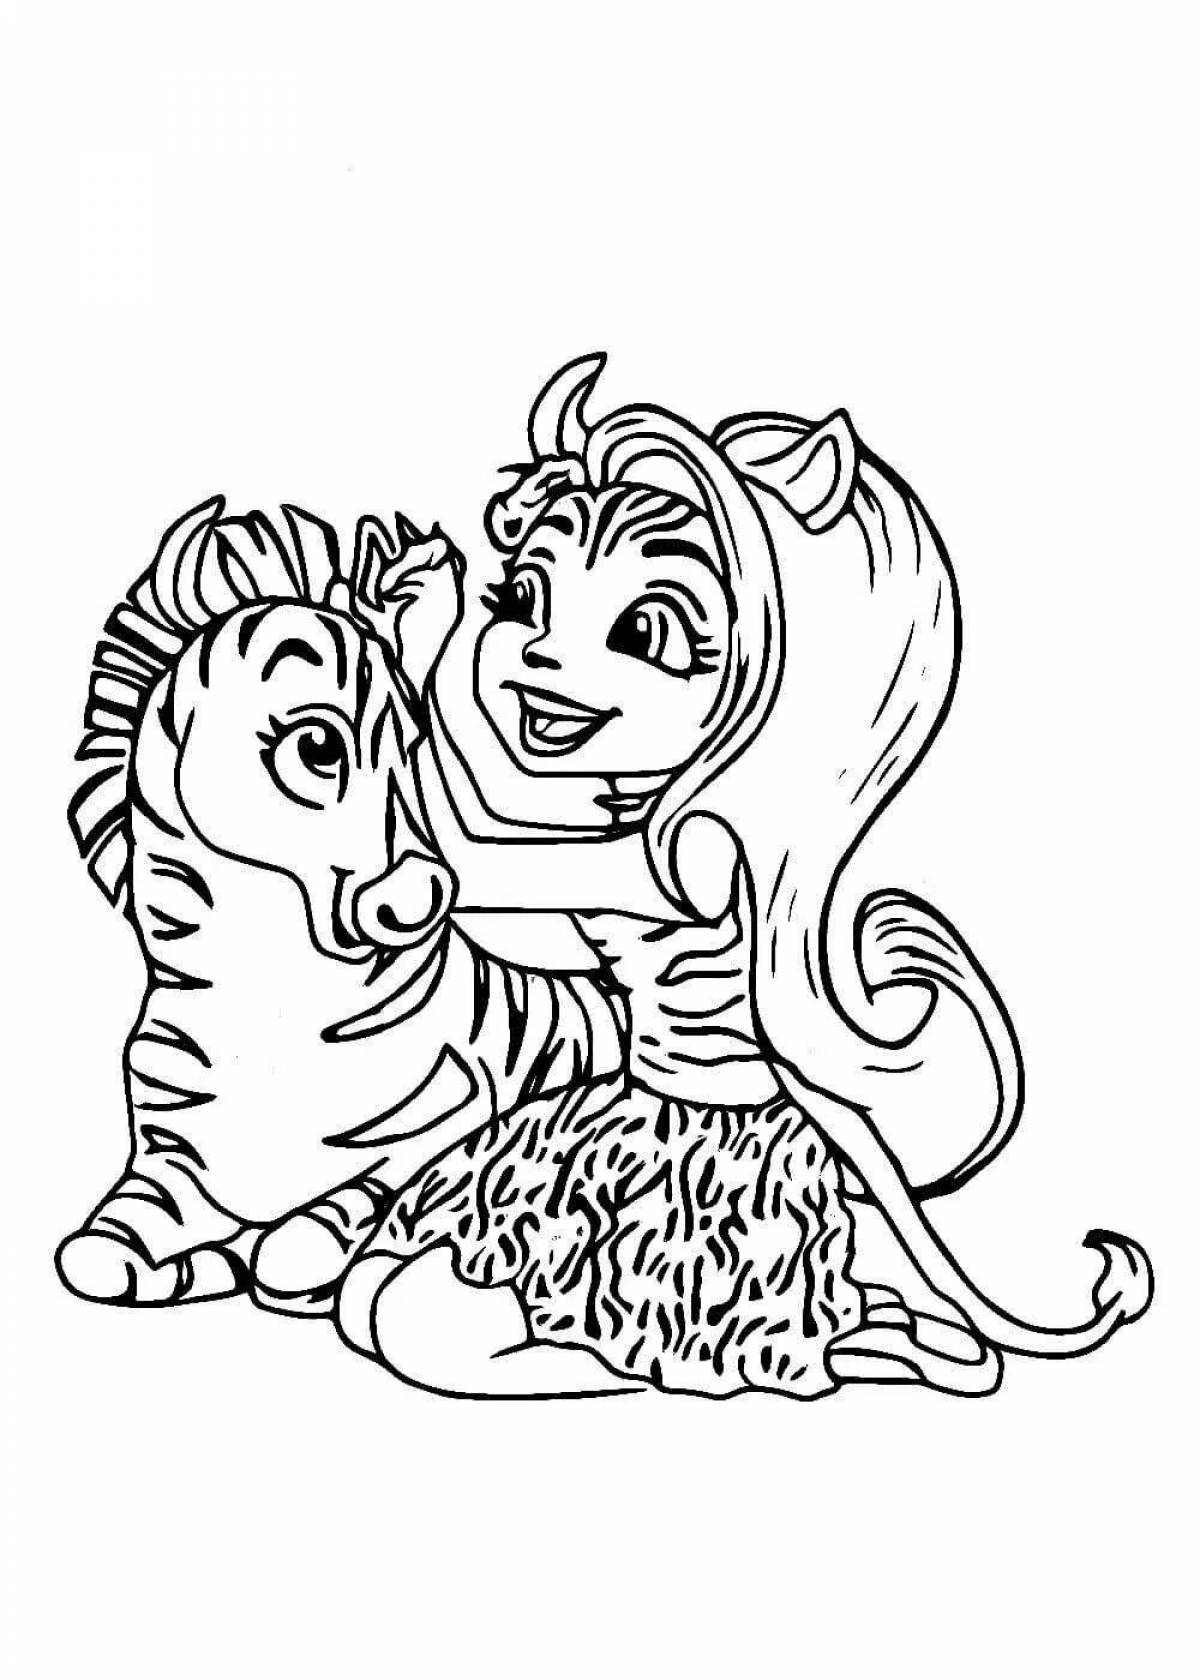 Glorious anhanchymus coloring page